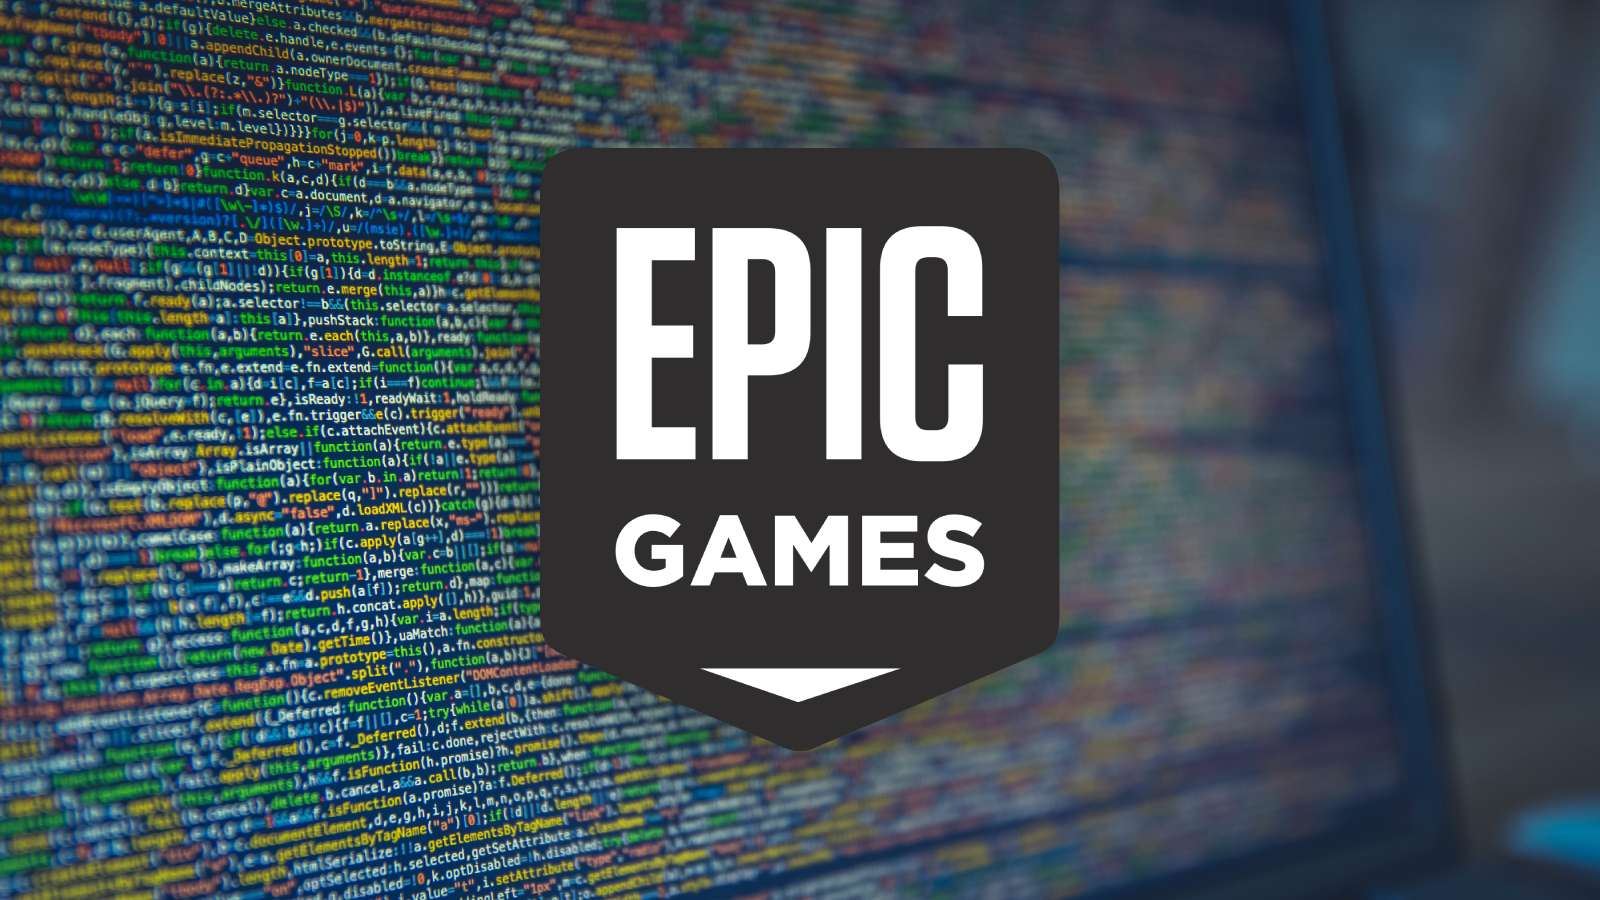 Epic games logo on background of laptop with code